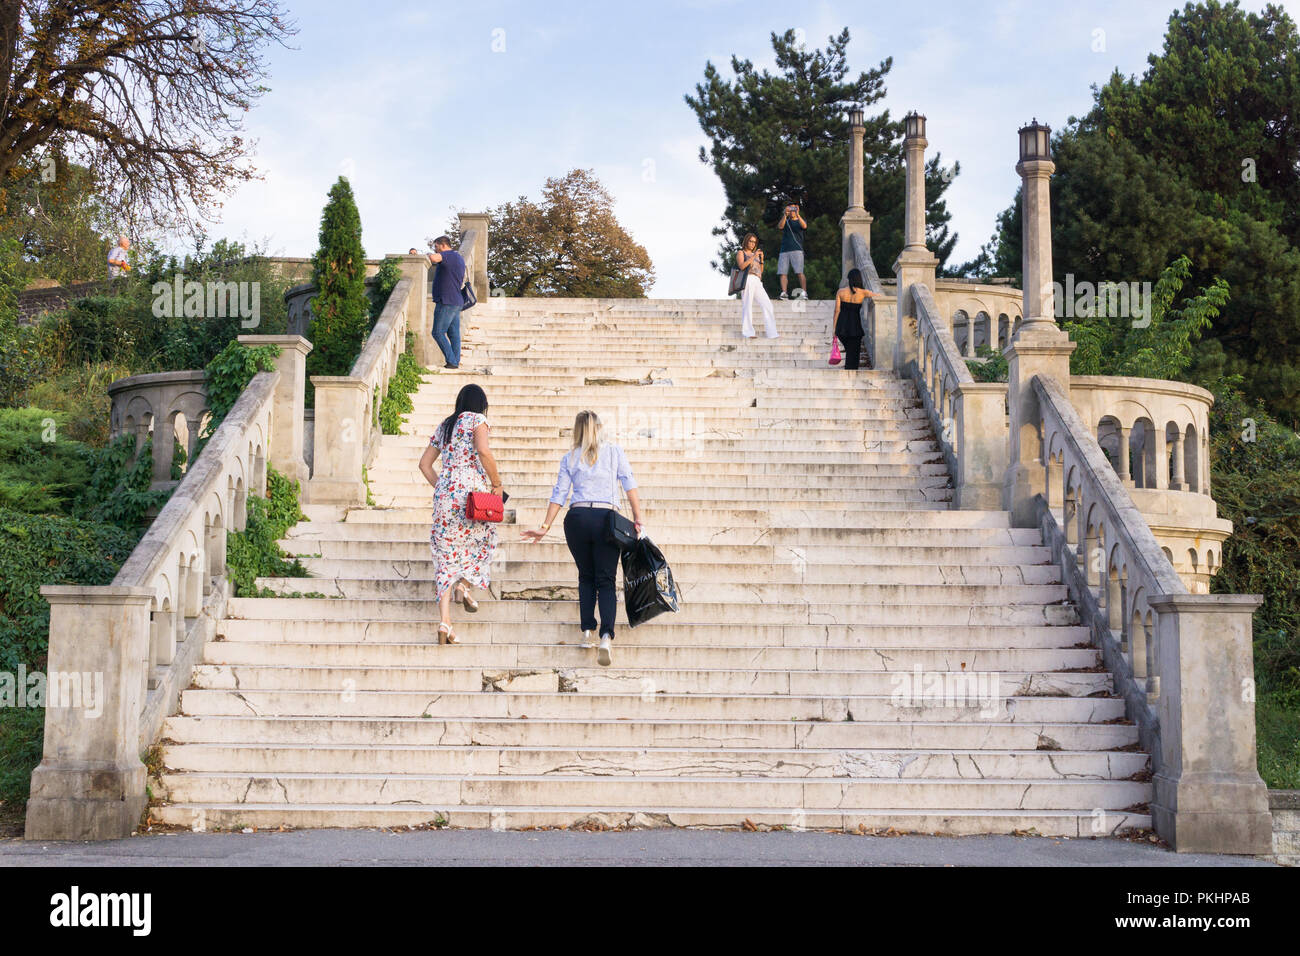 Staircase at the Belgrade fortress Kalemegdan, dating from the early 20th century. Serbia. Stock Photo